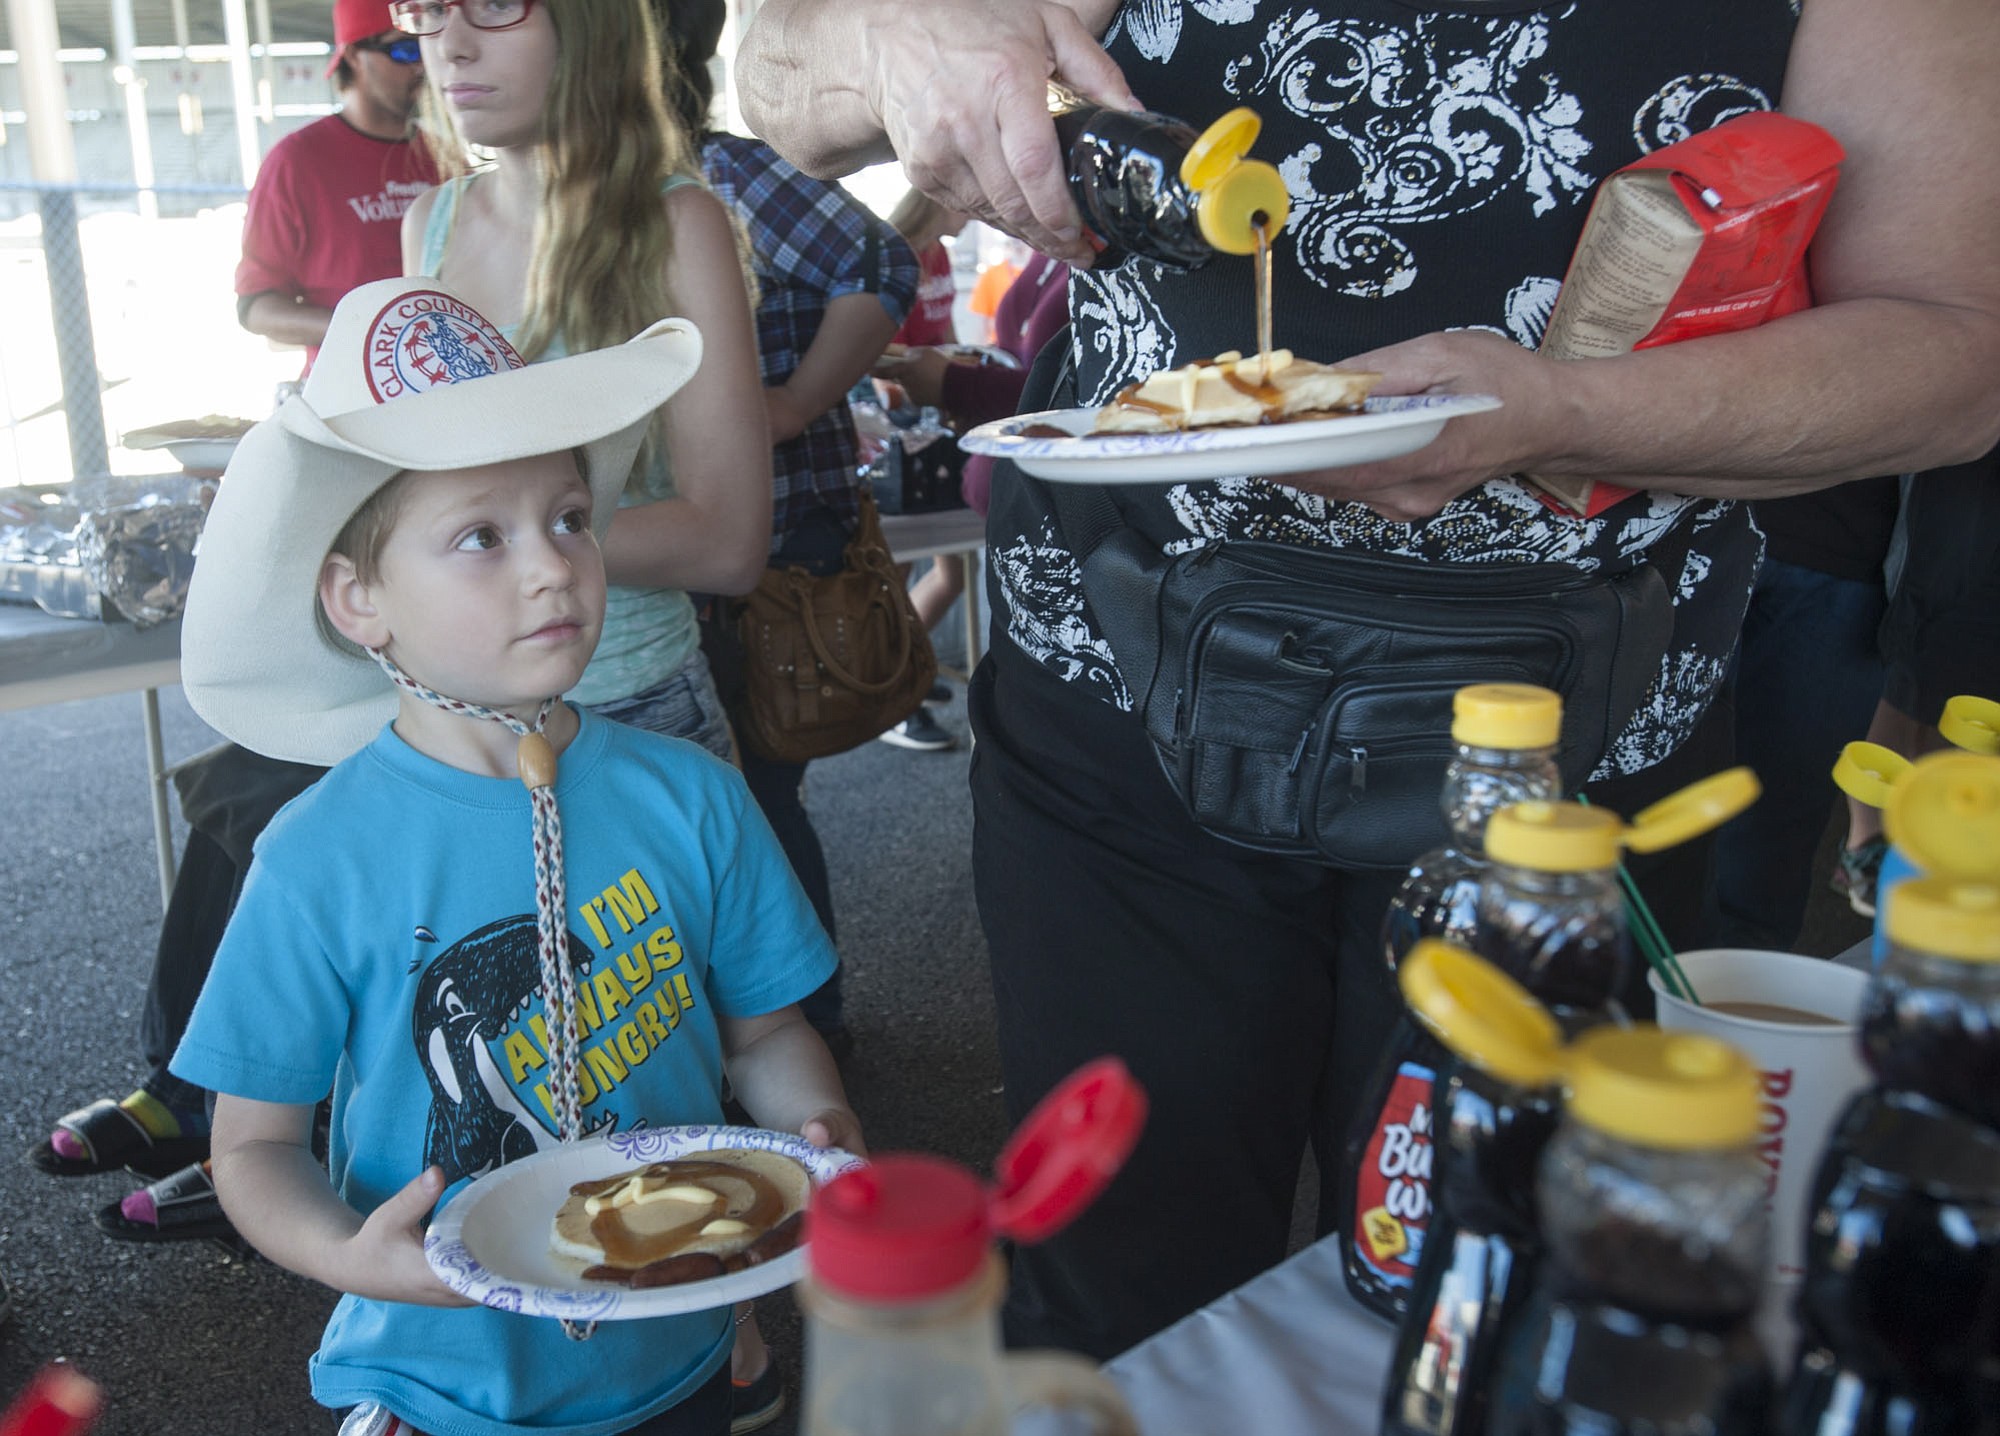 Dalton Anderson 4, watches as his grandma doles out syrup on their pancake breakfast at the Clark County Fairgrounds.